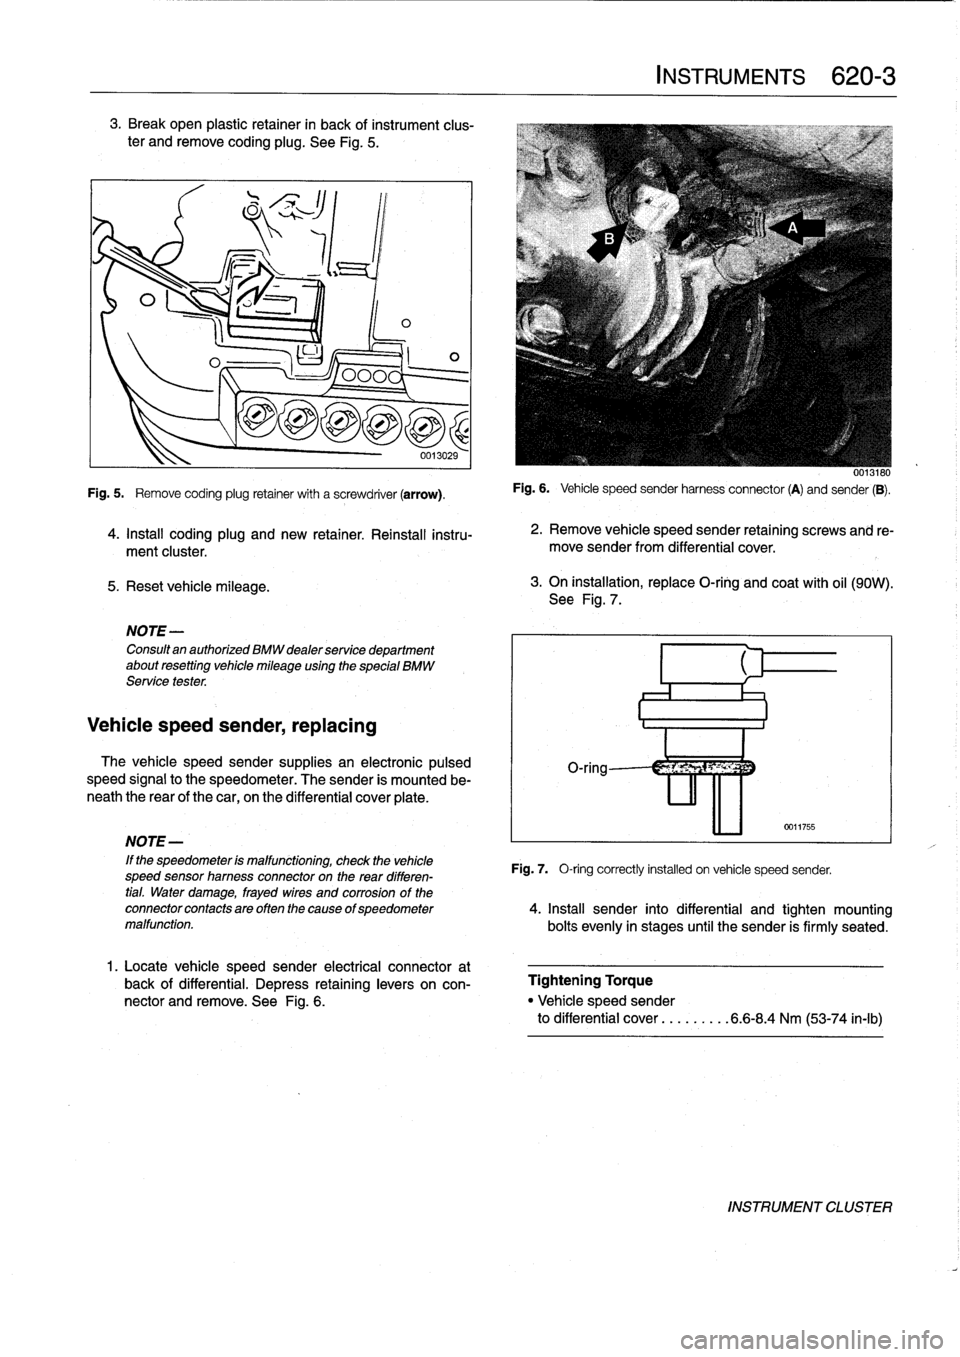 BMW 318i 1997 E36 Workshop Manual 3
.
Break
open
plastic
retainer
in
back
of
instrument
clus-
ter
andremove
coding
plug
.
See
Fig
.
5
.

5
.
Reset
vehicle
mileage
.

1
ILO

NOTE-

Consultan
authorized
BMW
dealer
service
department
abo